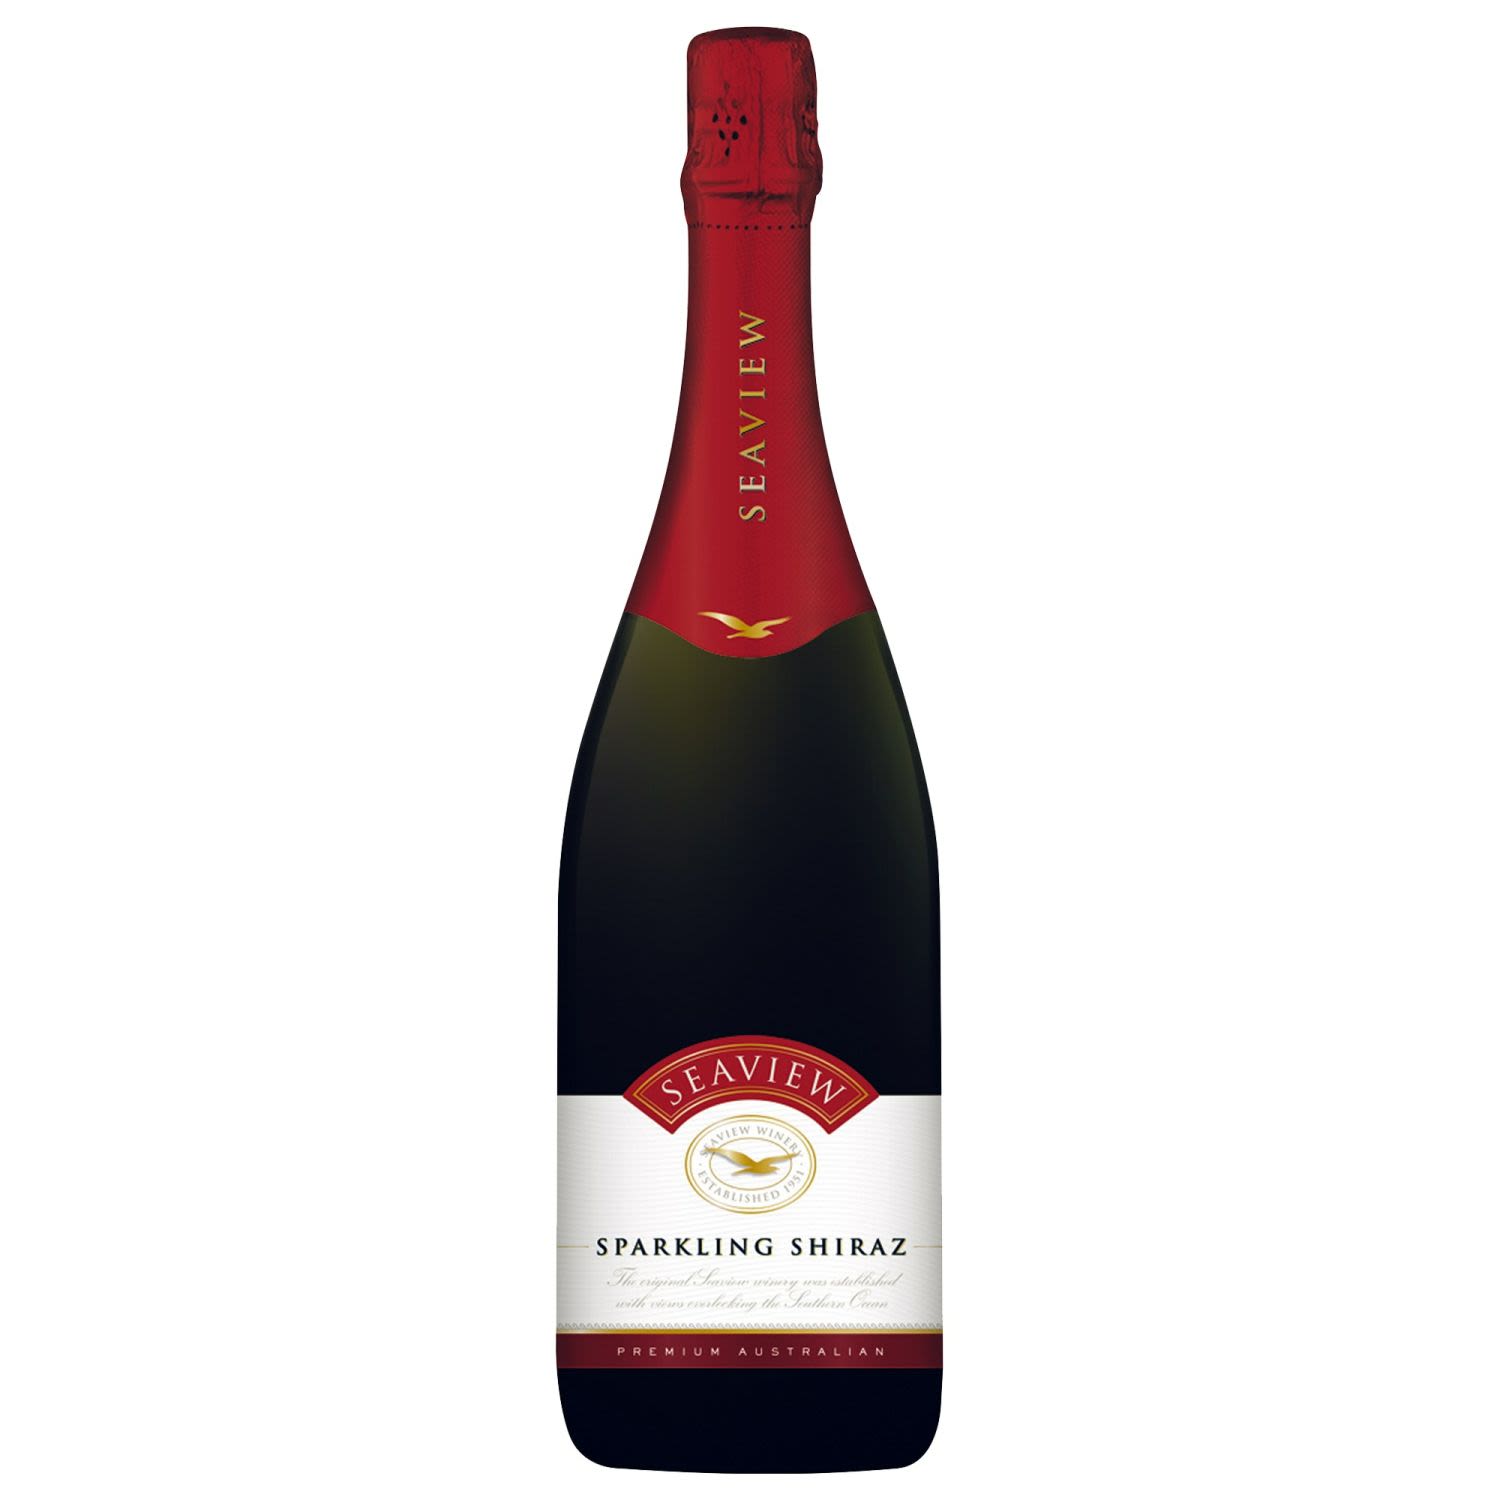 The nose has aromas of berries, cherries & spice, typical of Shiraz. The palate is rich, round & soft with sweet berry fruit flavours & soft lingering finish.<br /> <br />Alcohol Volume: 13.50%<br /><br />Pack Format: Bottle<br /><br />Standard Drinks: 8<br /><br />Pack Type: Bottle<br /><br />Country of Origin: Australia<br /><br />Region: South Eastern Australia<br /><br />Vintage: Non Vintage<br />